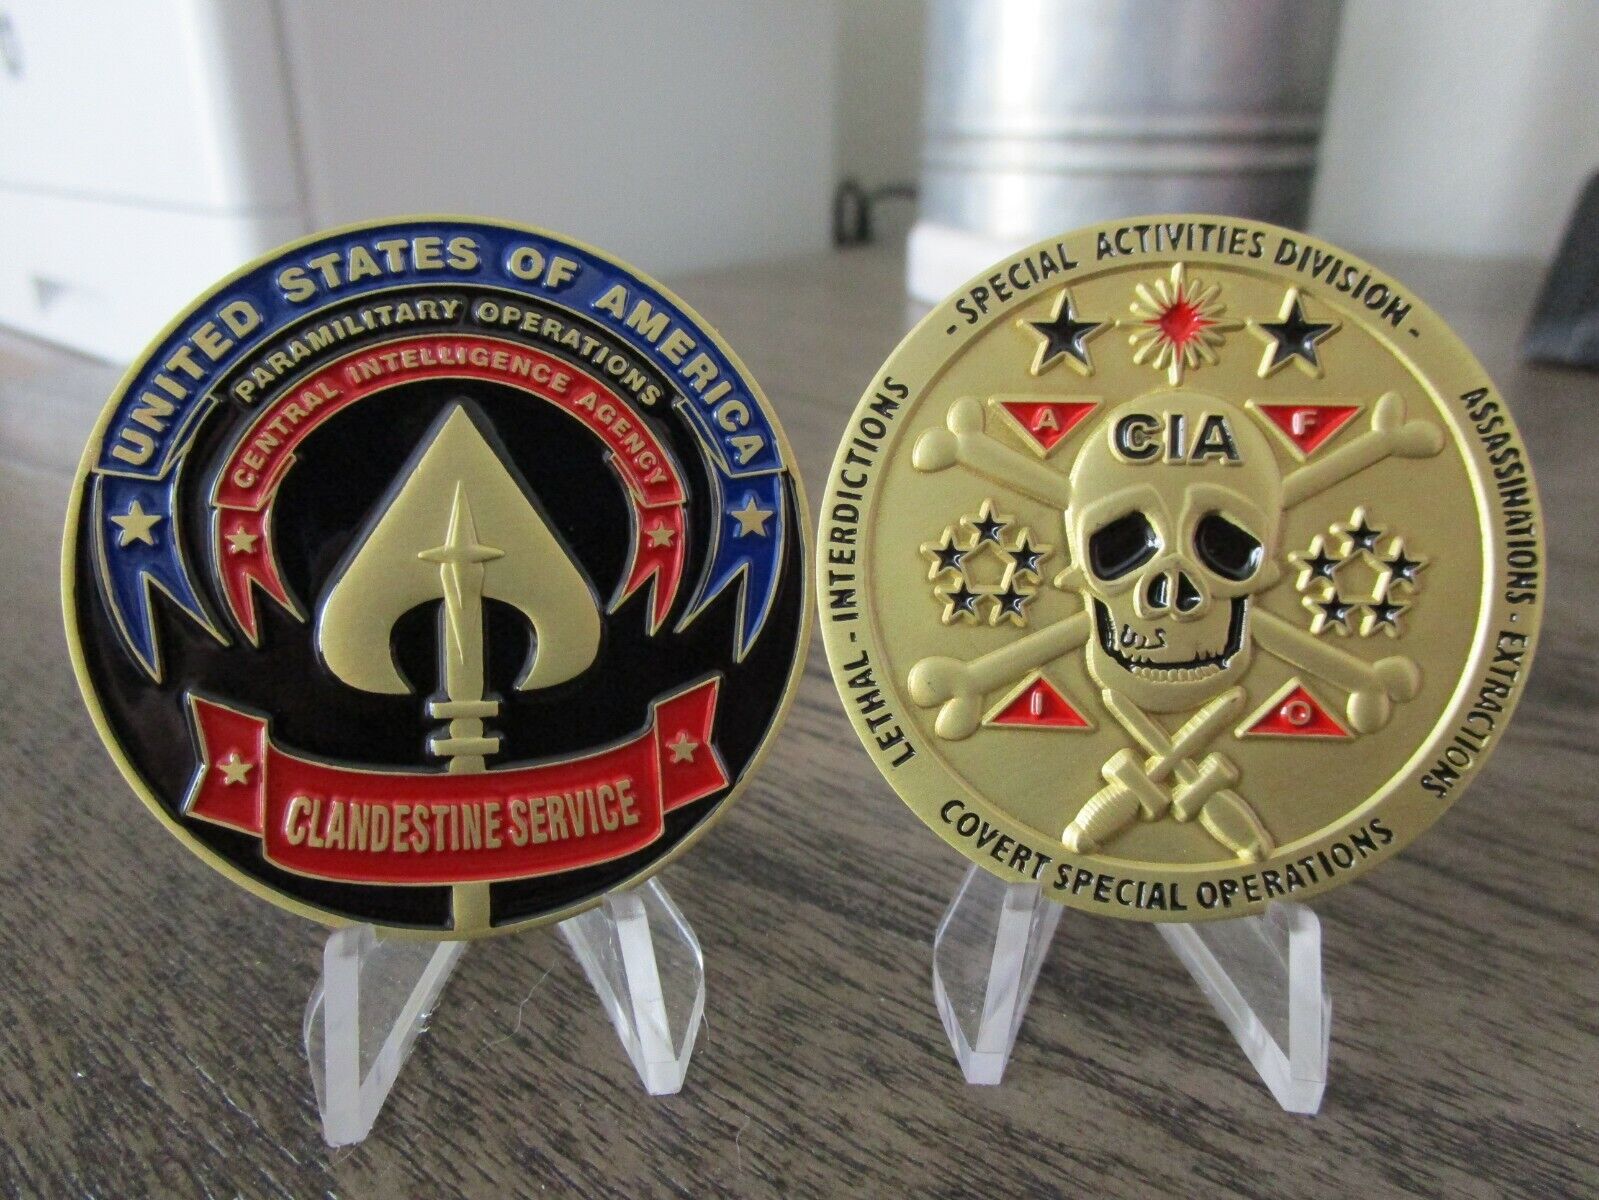 CIA Covert Special Operations Clandestine Service Lethal HUMINT Challenge Coin 